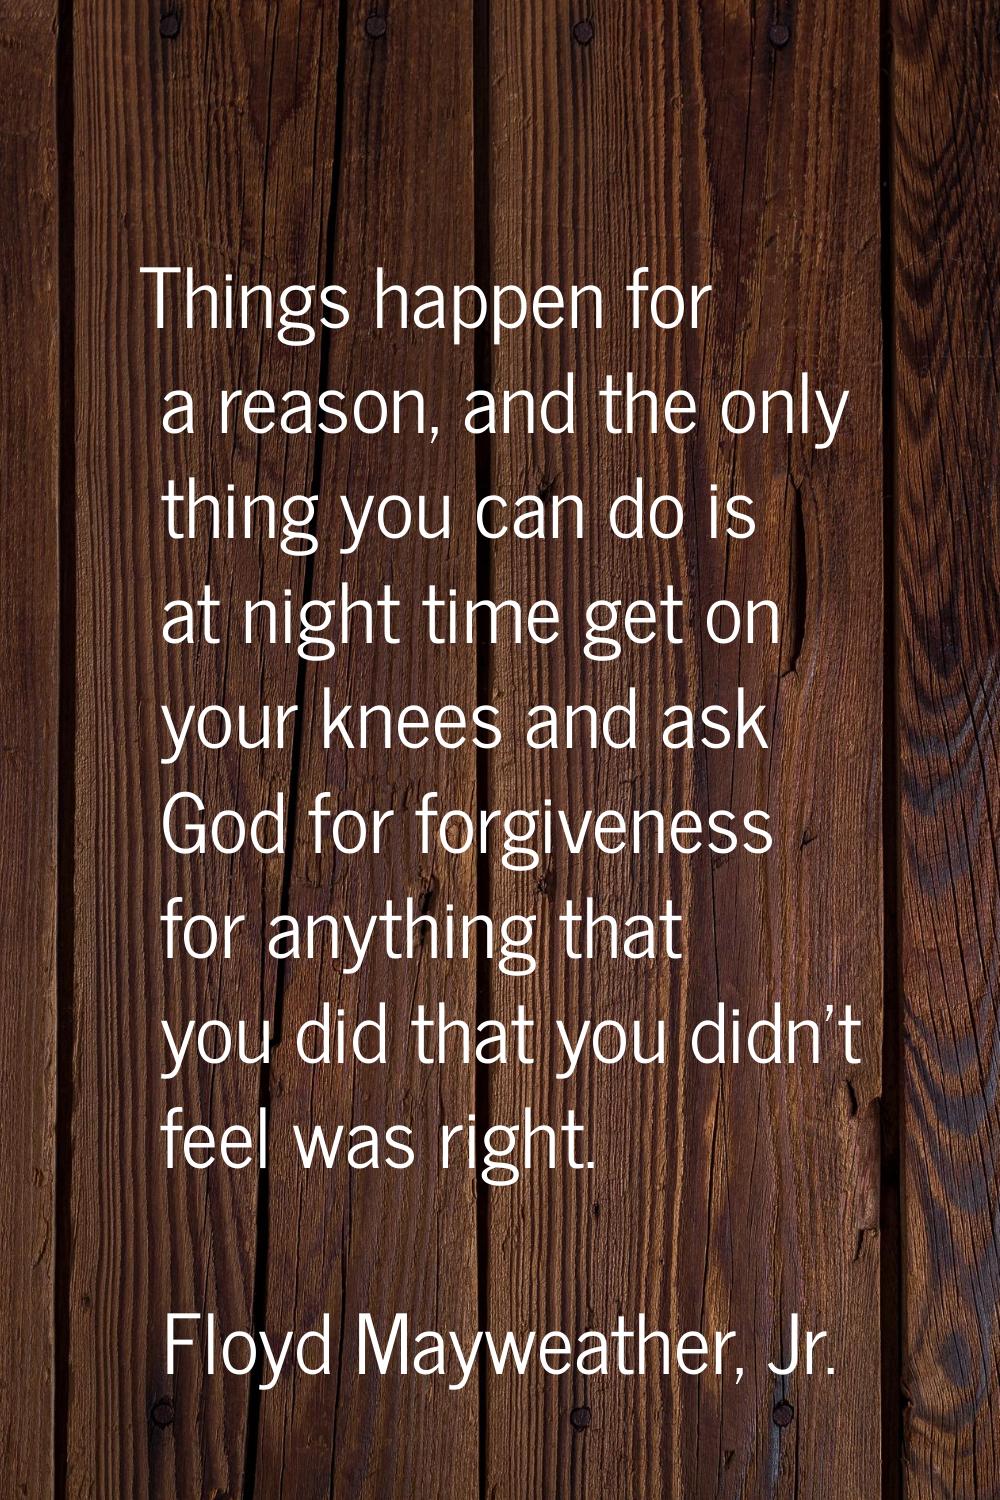 Things happen for a reason, and the only thing you can do is at night time get on your knees and as